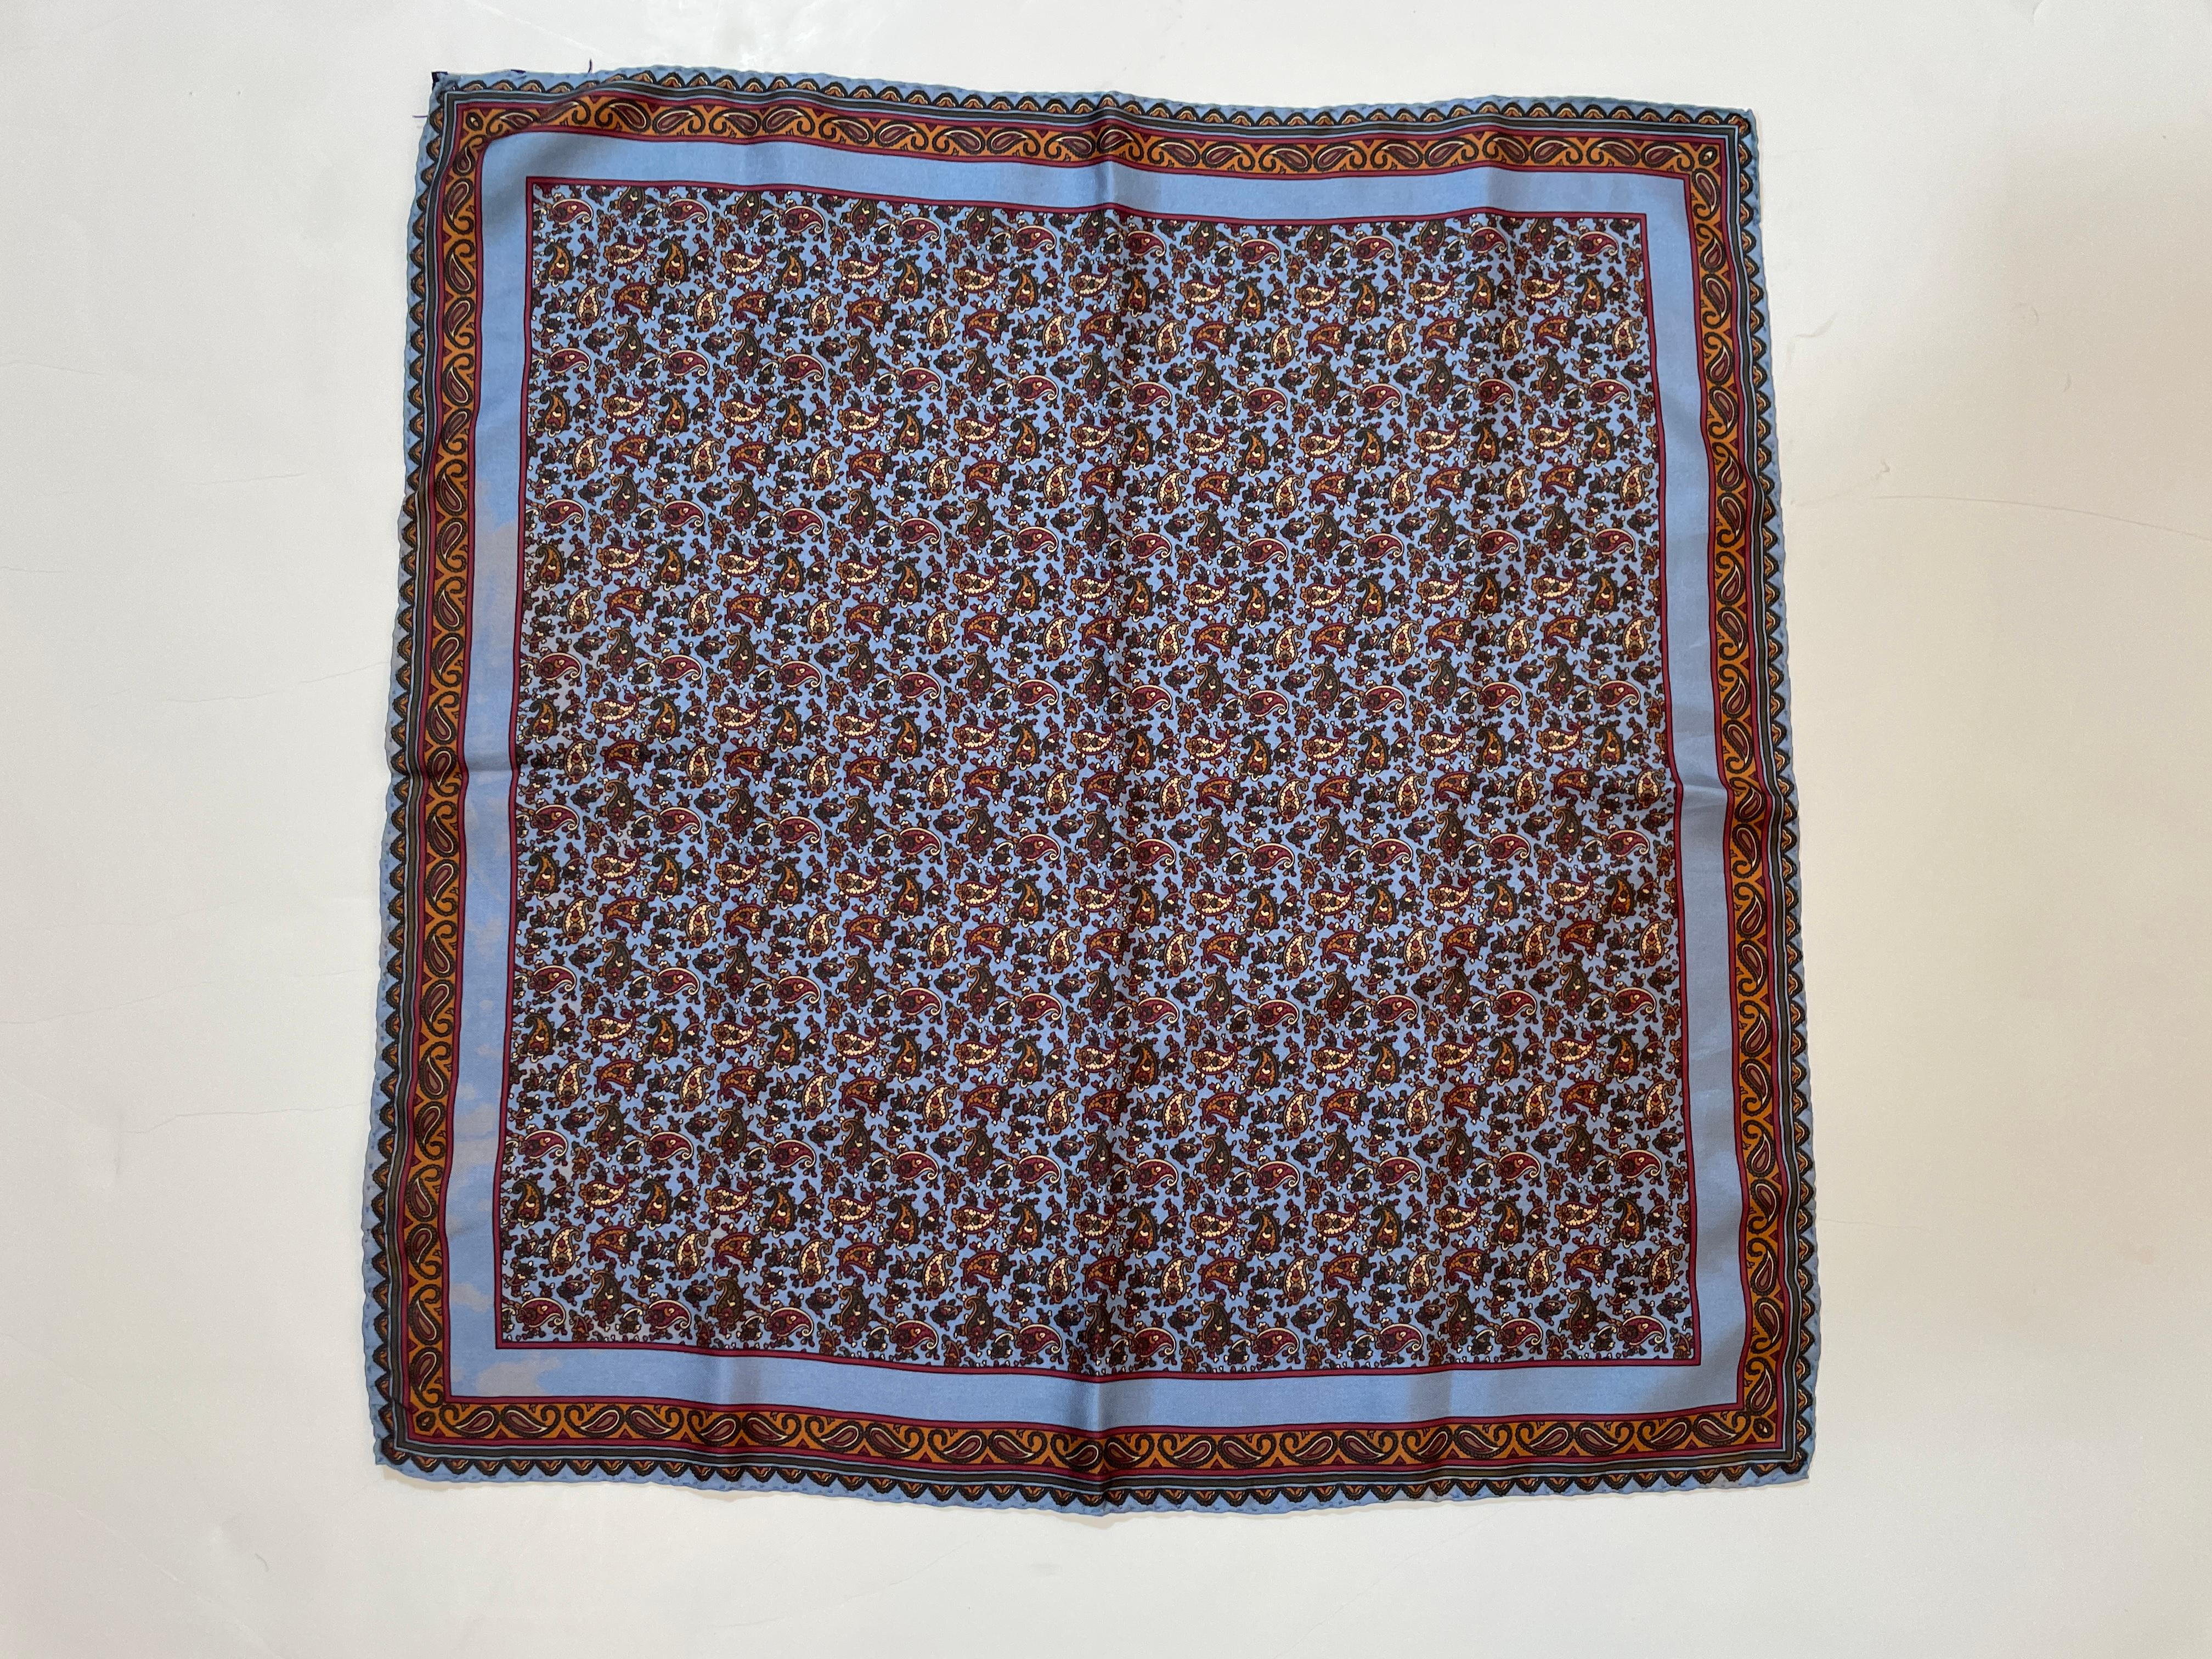 IMPERIAL Pocket Square 100% Silk Handkerchief.
Made in Italy and rolled edge. 
Beautiful colors vintage blue silk pocket square scarf in rust, orange and gold paisley design motif print
Hand rolled edges.
Hallmark Brand Signature: IMPERIAL.
Made in